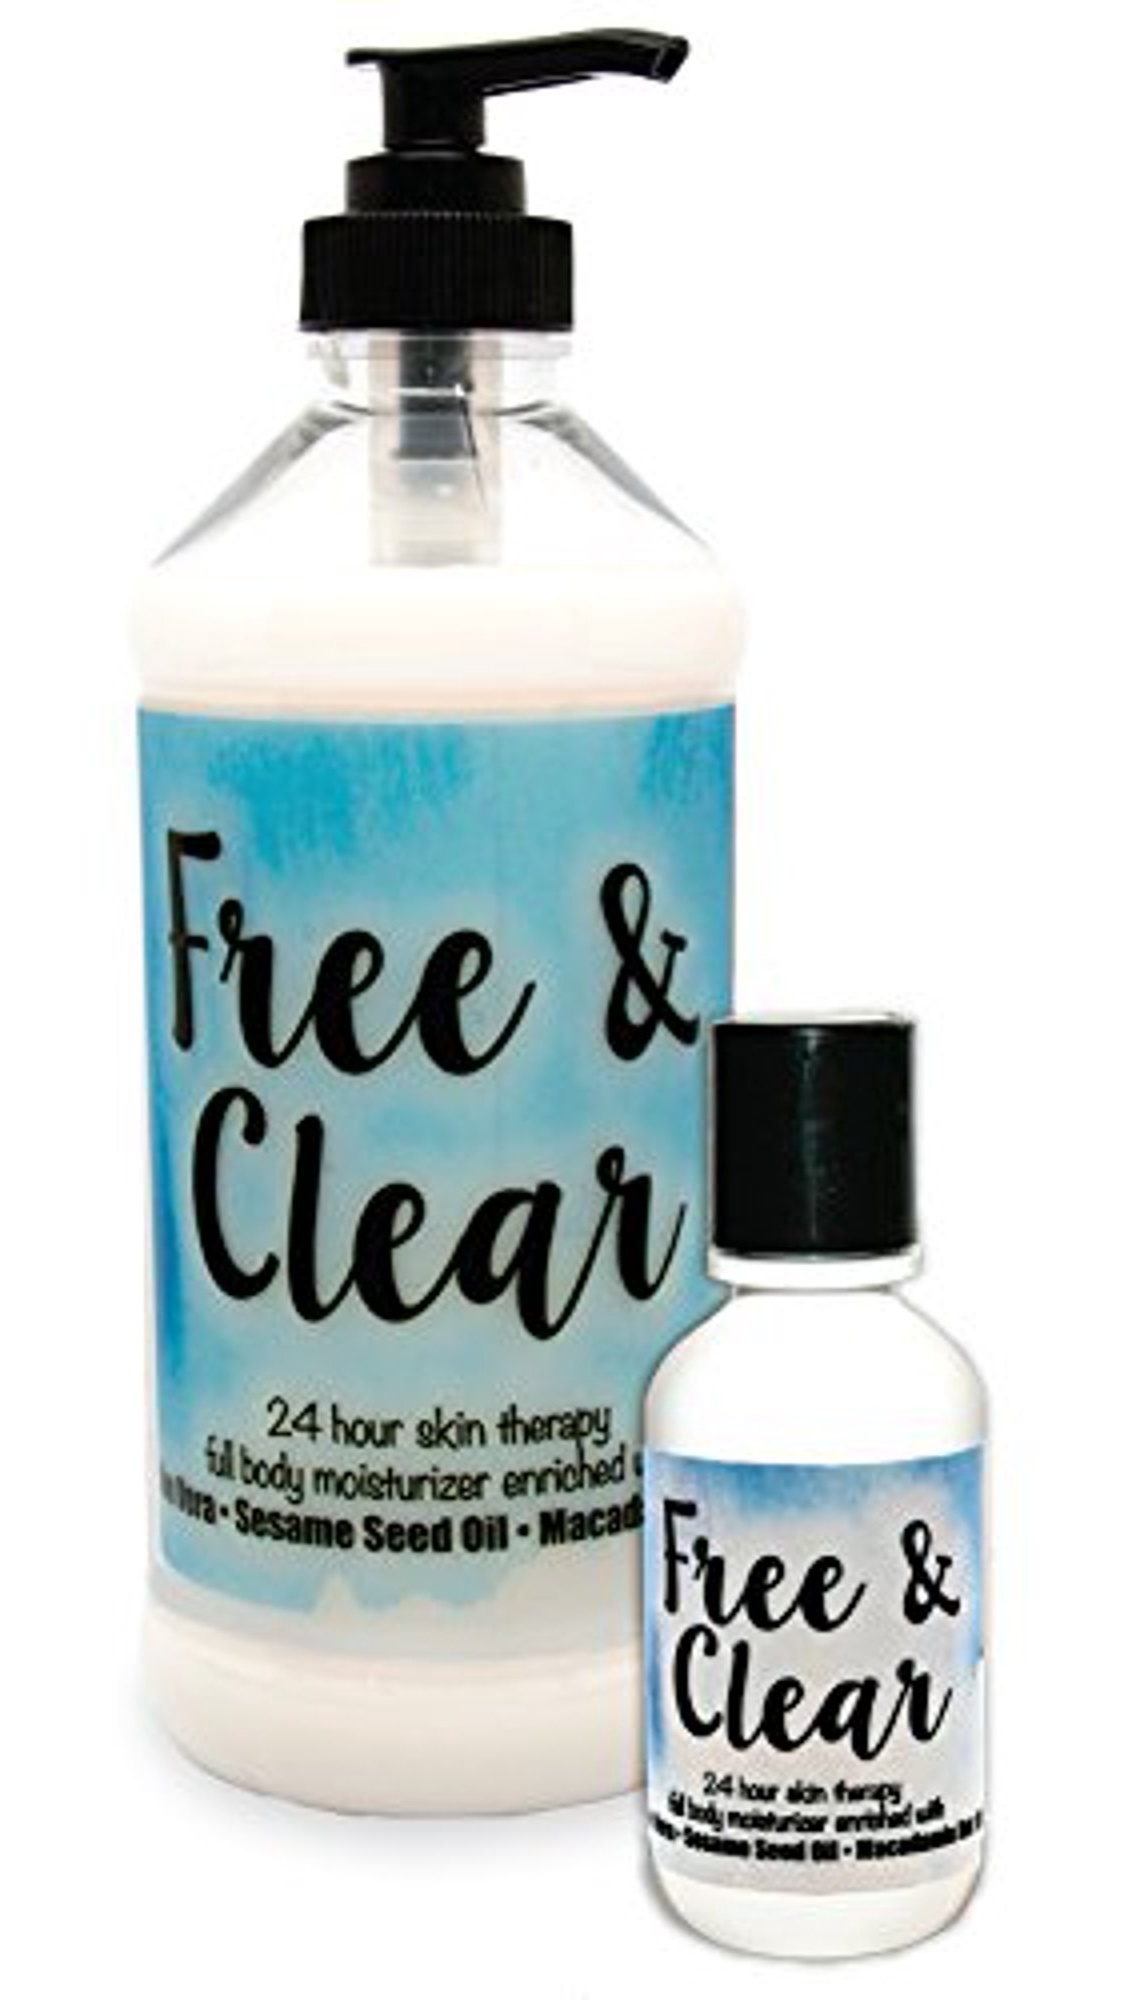 The Lotion Company 24 Hour Skin Therapy Free & Clear